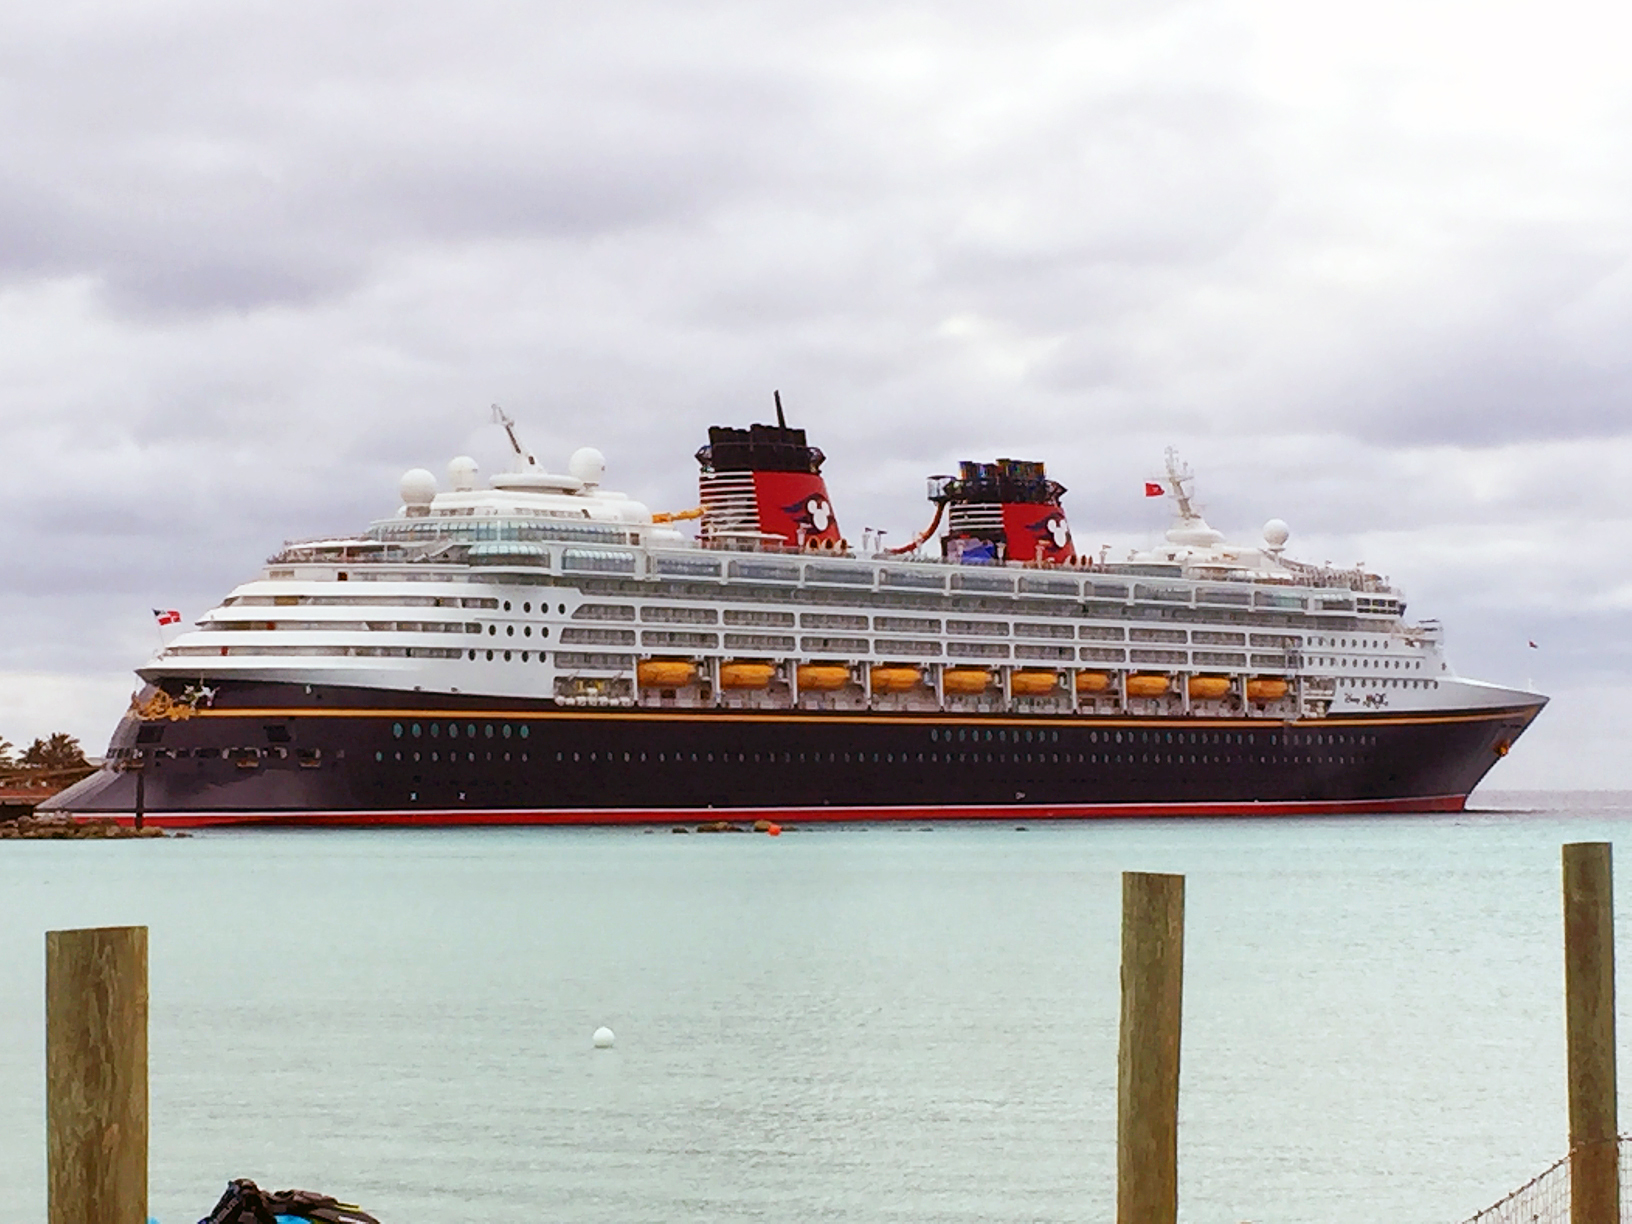 Disney Cruise Line guests love to participate in Fish Extender gift exchanges.